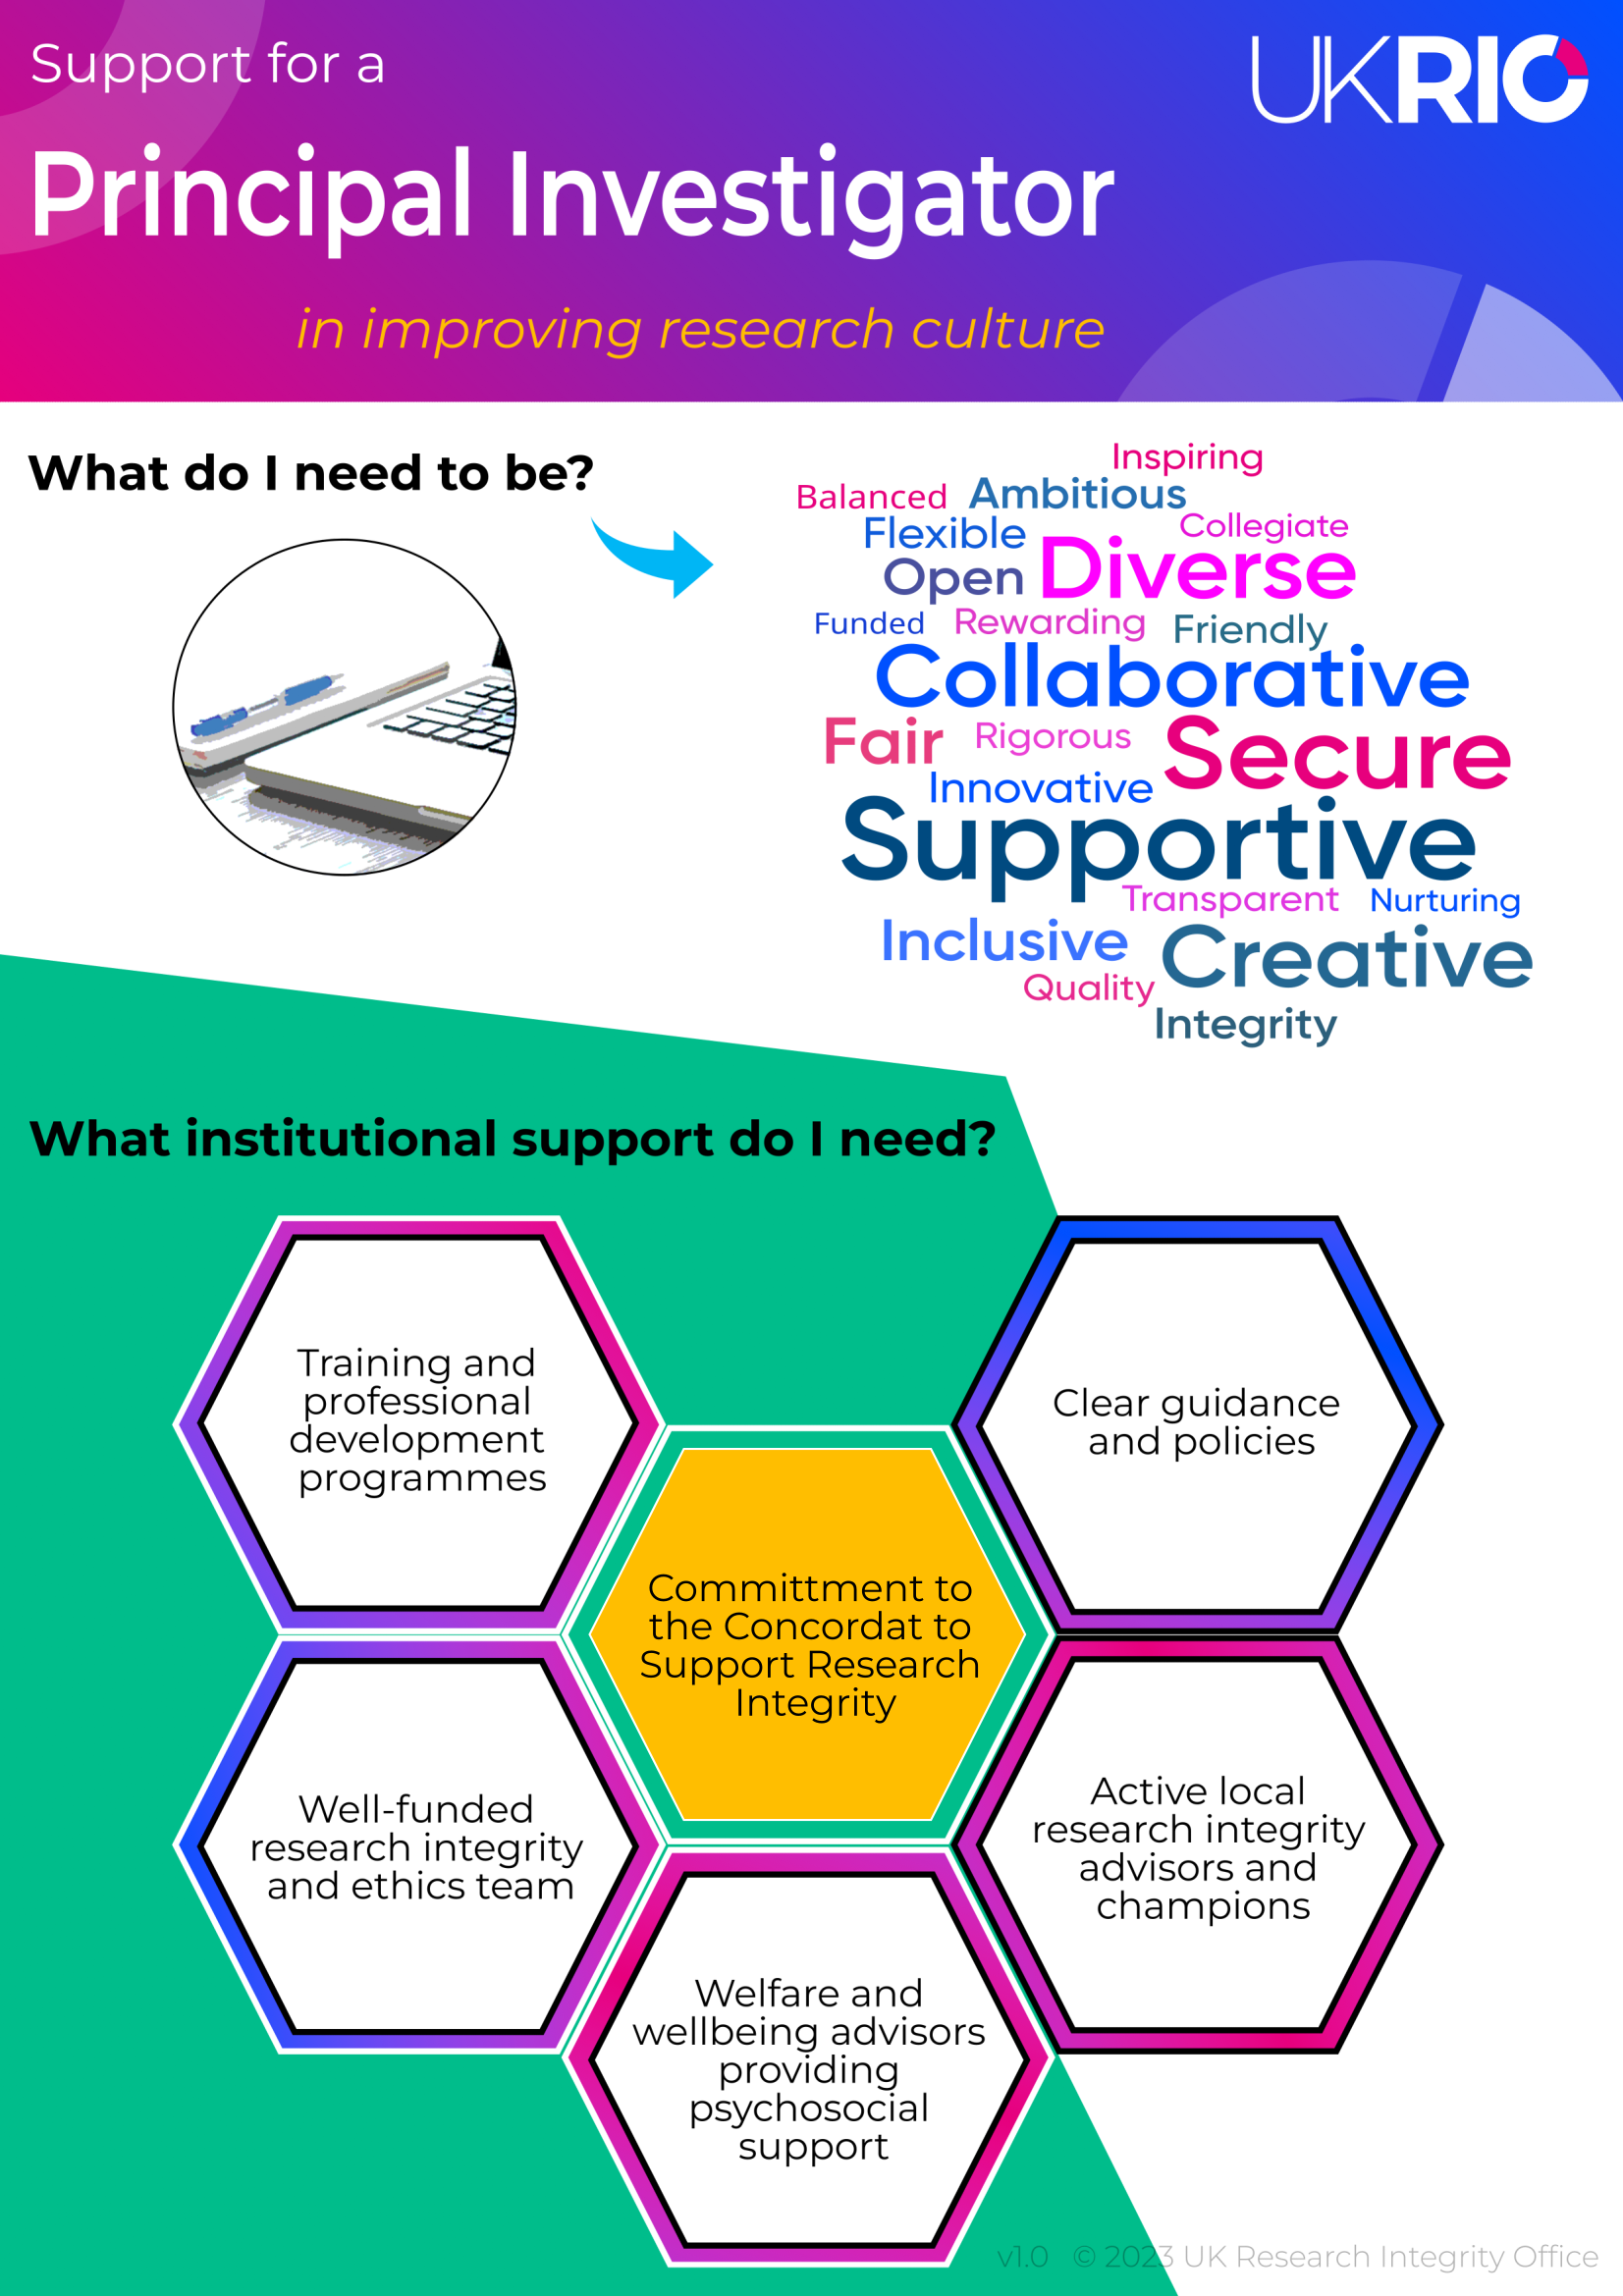 Support for a Principal Investigator in improving research culture, UKRIO infographic. What do I need to be? Word cloud: Inspiring Balanced Ambitious Flexible Open Diverse Collegiate Funded Rewarding Friendly Collaborative Fair Rigorous Secure Innovative Supportive Transparent Nurturing Inclusive Creative Quality Integrity. What institutional support do I need? Training and professional development programmes; Well-funded research integrity and ethics team; Welfare and wellbeing advisors providing psychosocial support; Clear guidance and policies; Committment to the Concordat to Support Research Integrity; Active local research integrity advisors and champions. v1.0 2023 UK Research Integrity Office